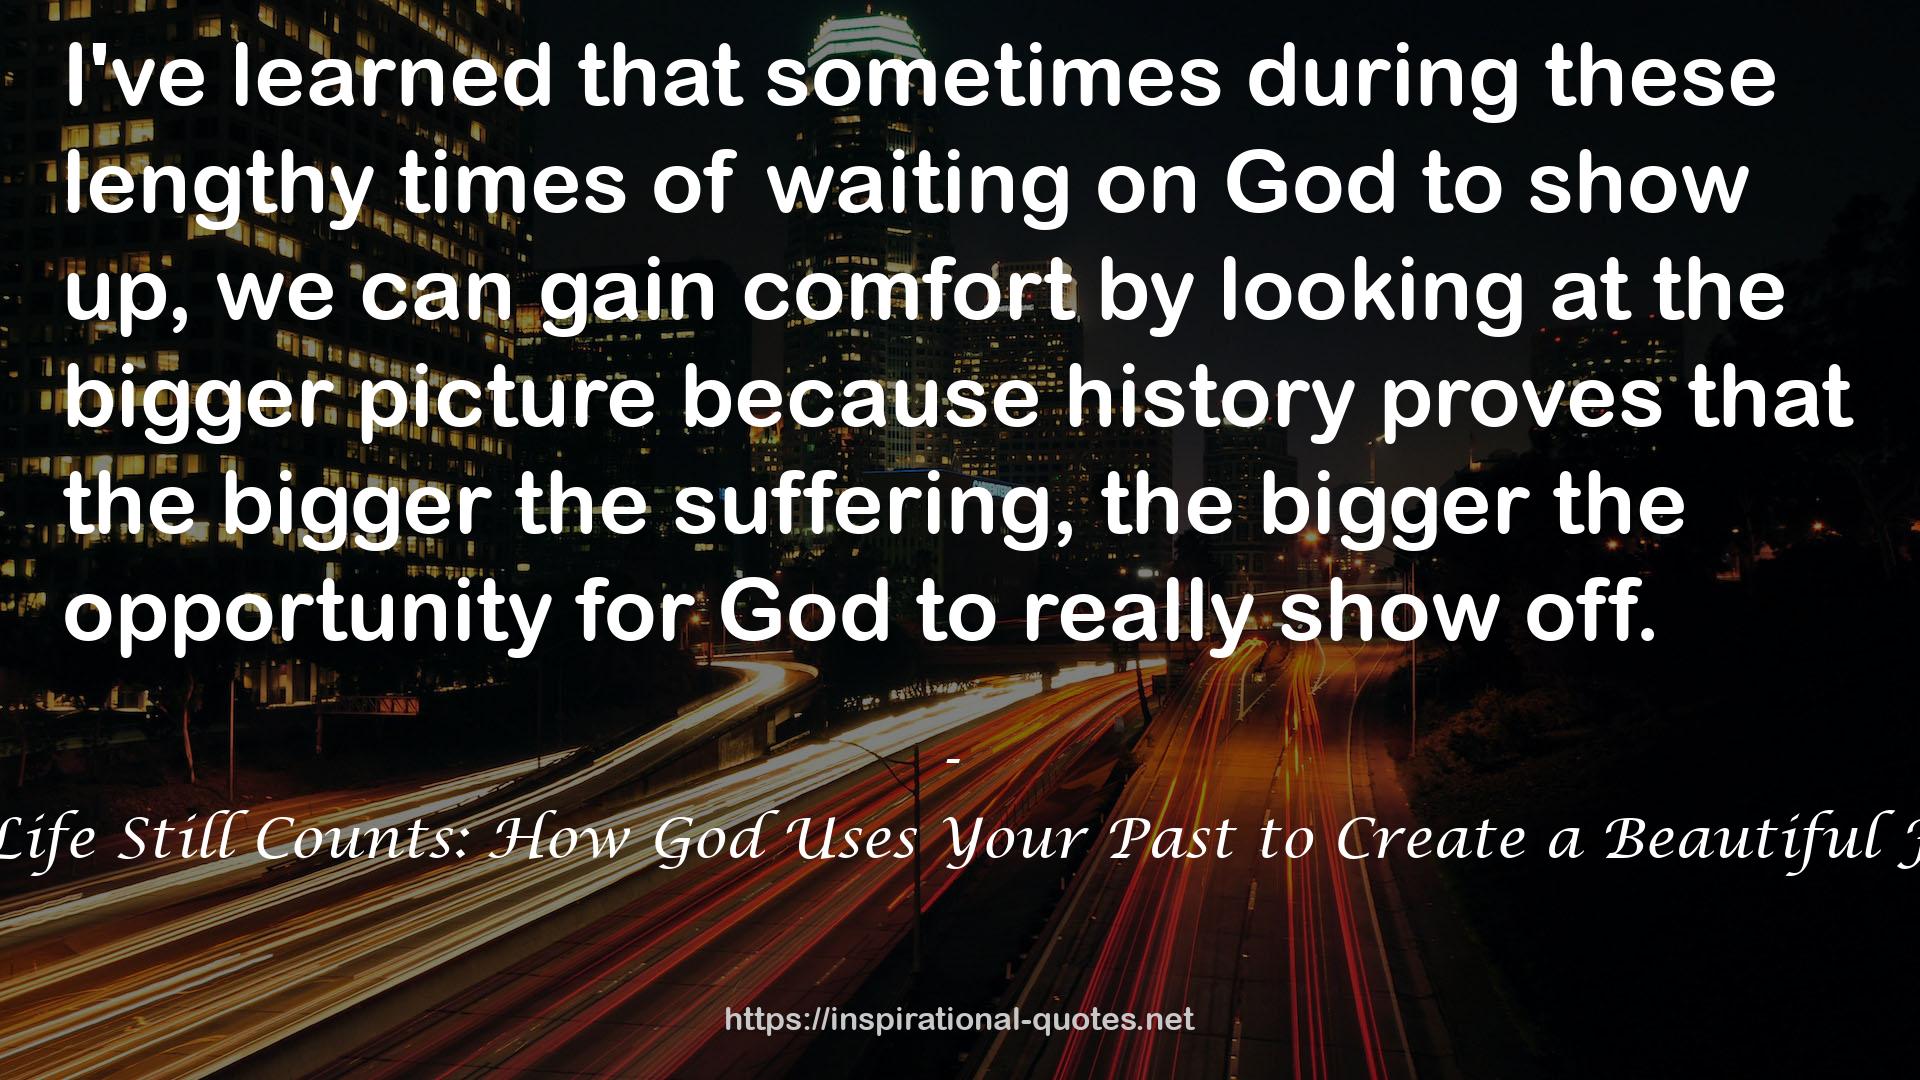 Your Life Still Counts: How God Uses Your Past to Create a Beautiful Future QUOTES